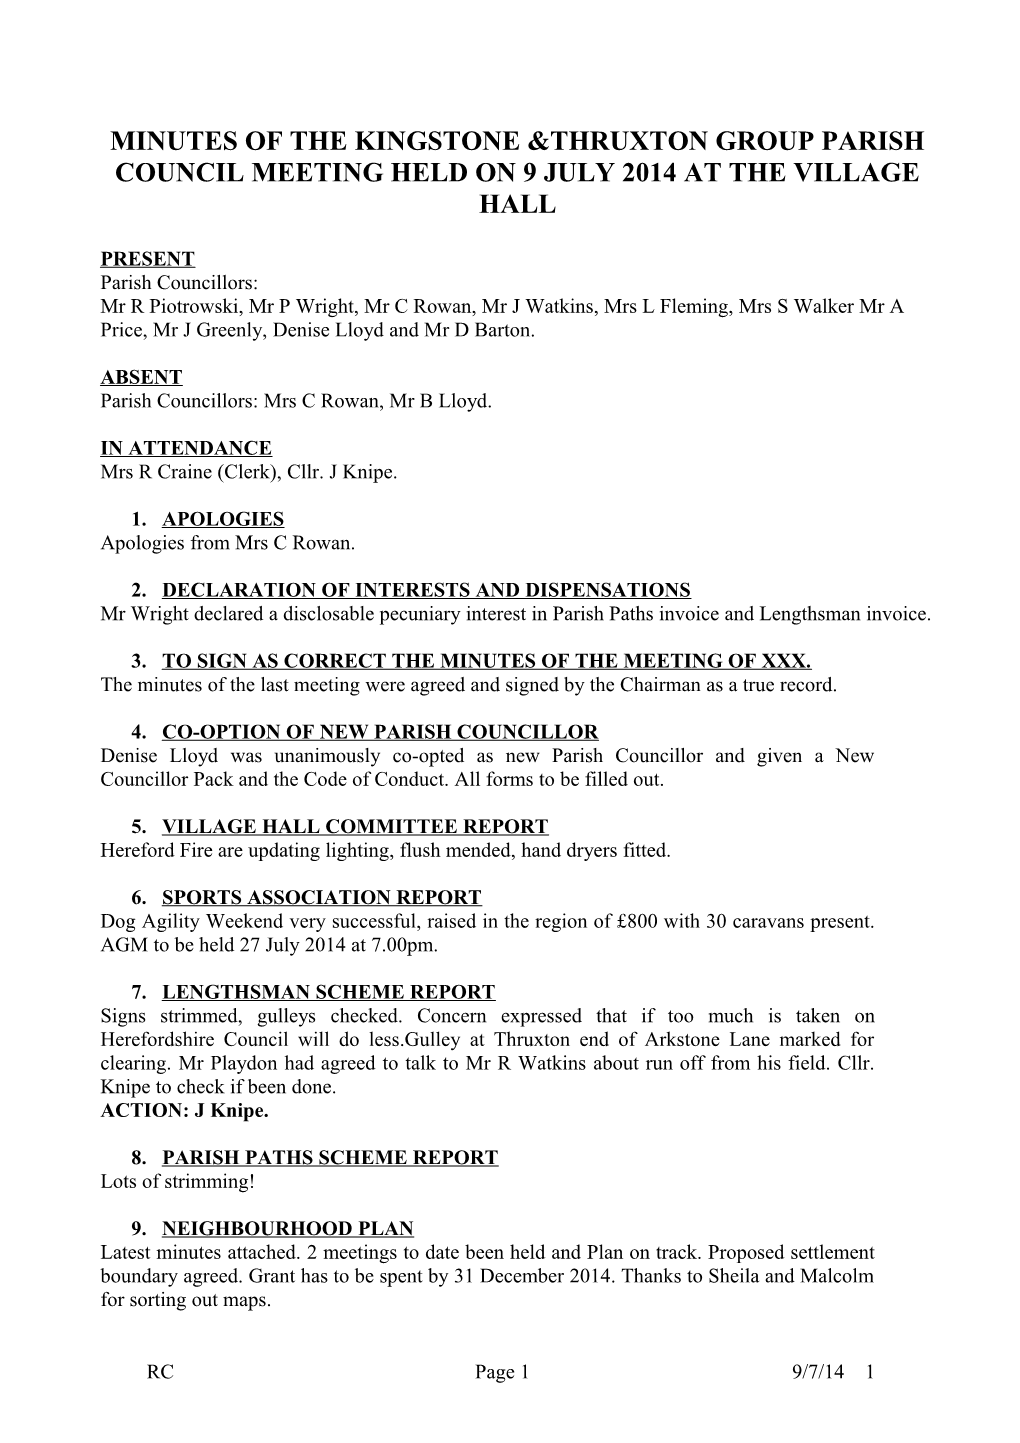 Minutes of the Kingstone &Thruxton Group Parish Council Meeting Held on 21 August 2013